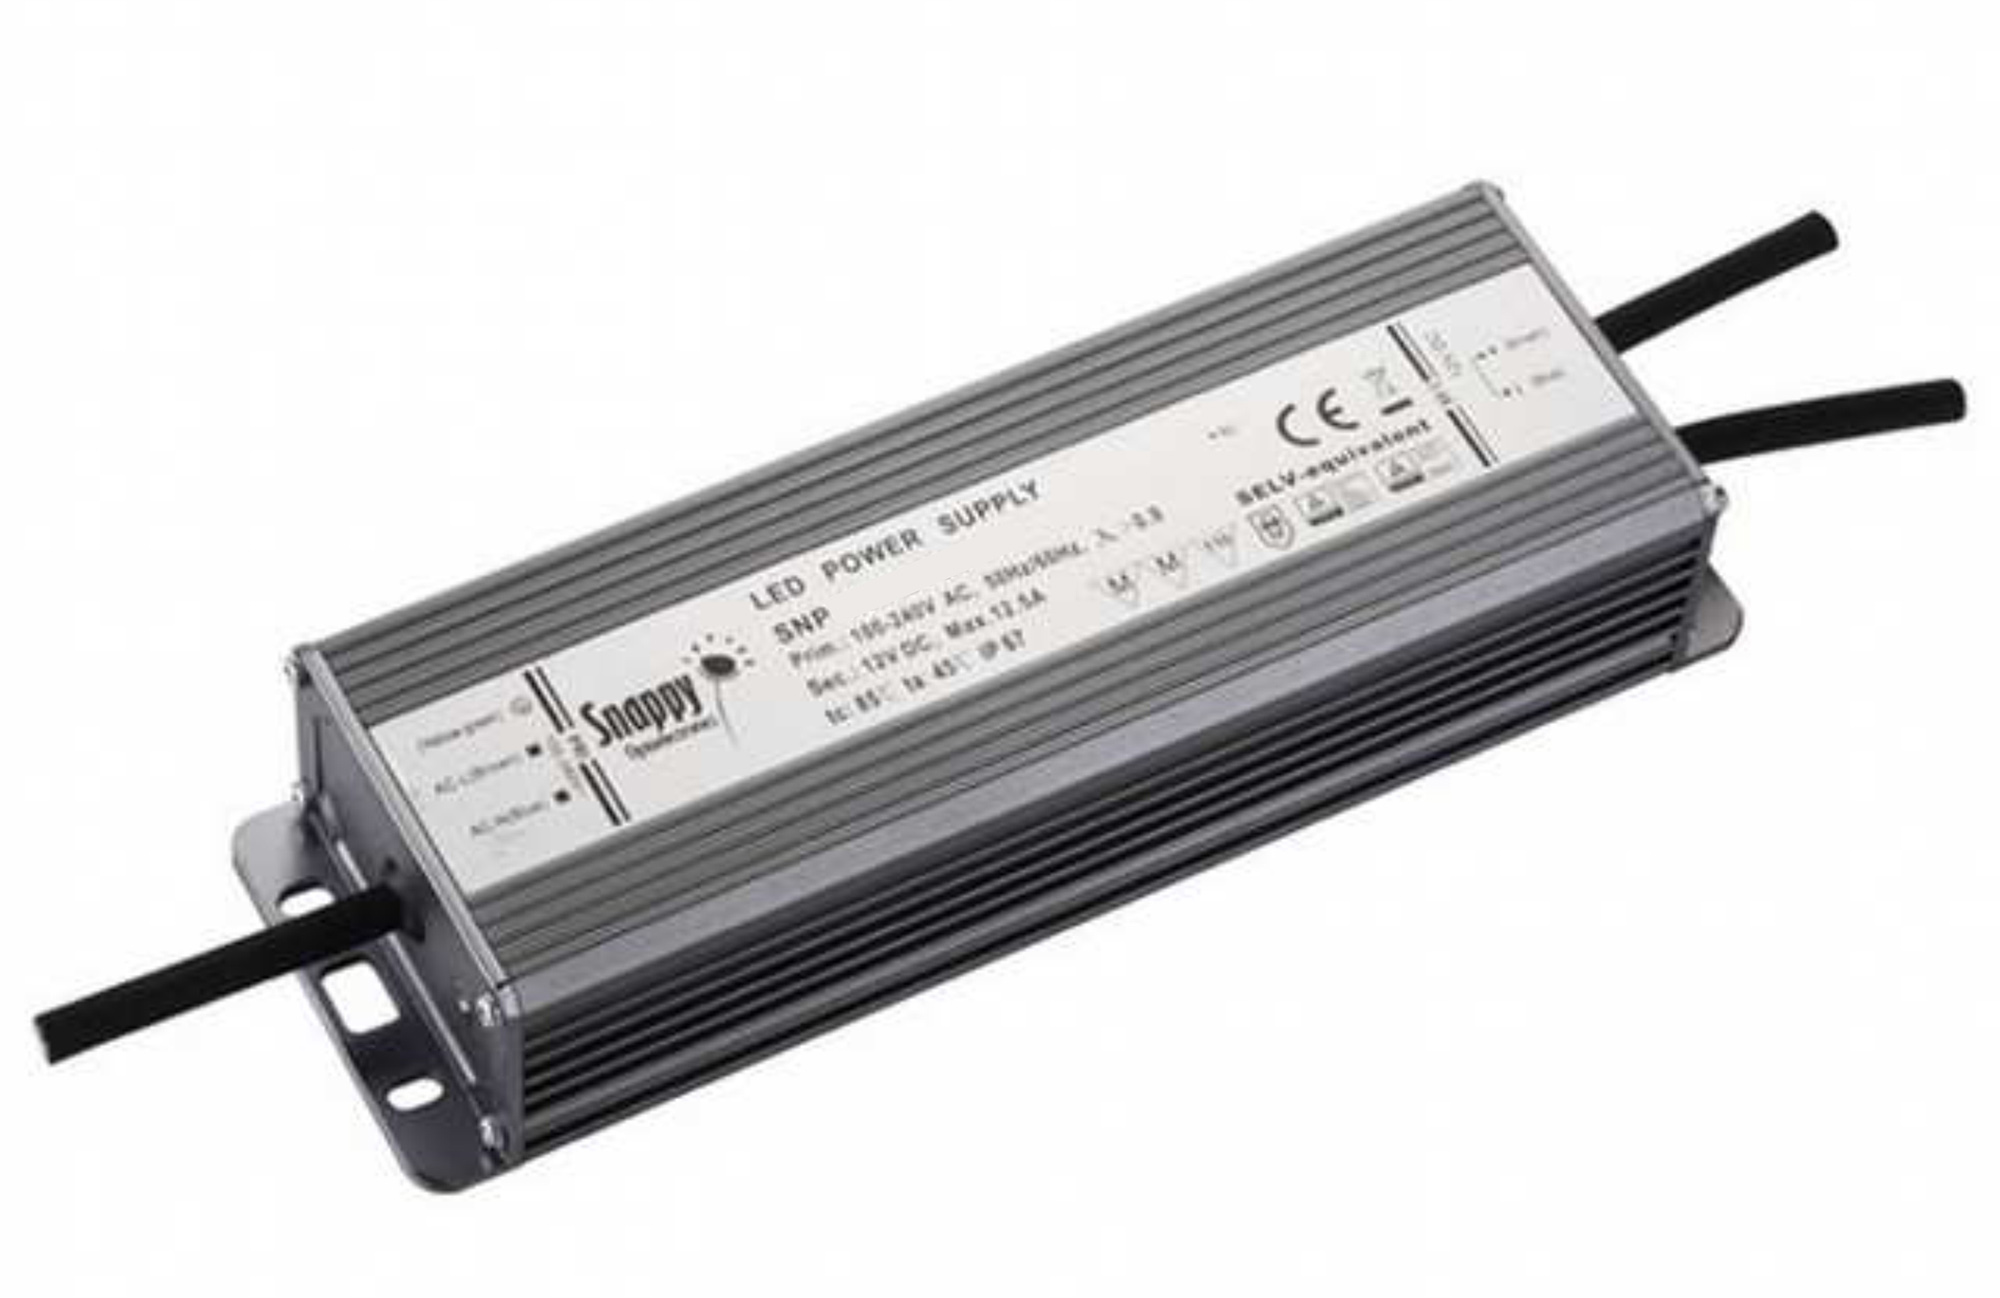 SPE250-24VLP  SPE, 250W, Constant Voltage Non Dimmable Aluminum LED Driver, 24VDC, 10.4A, Pf>0.9, TC:+90?, TA:45?, IP67, Effi>90%, Screw Connection, 3yrs Warranty.